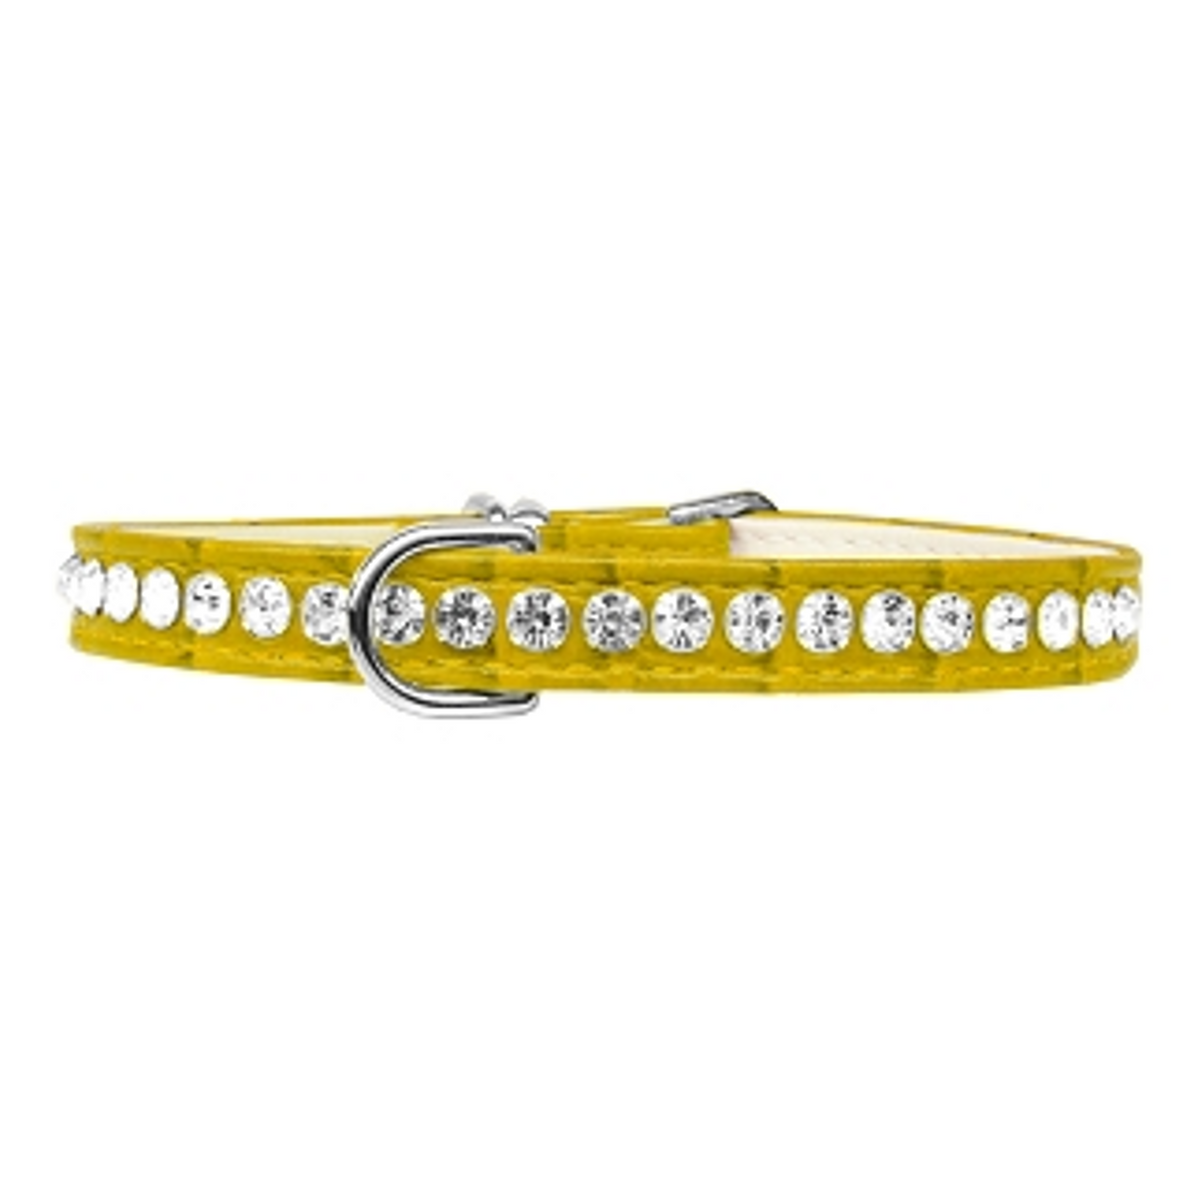 Grace 1-row Crystal Faux Croc Dog Collar - Yellow - 3 Red Rovers